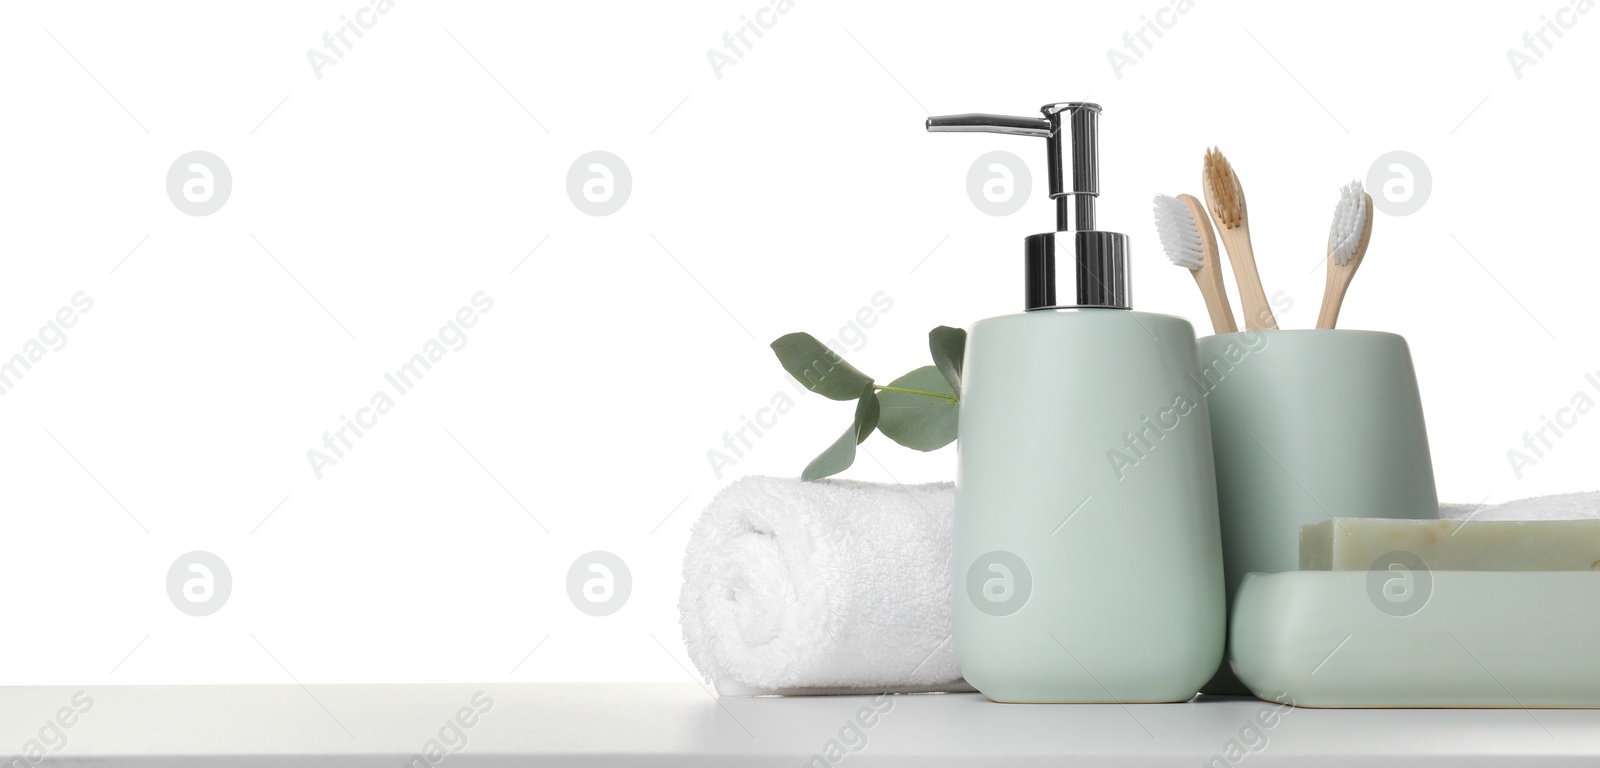 Photo of Bath accessories. Different personal care products and eucalyptus branch on table against white background. Space for text